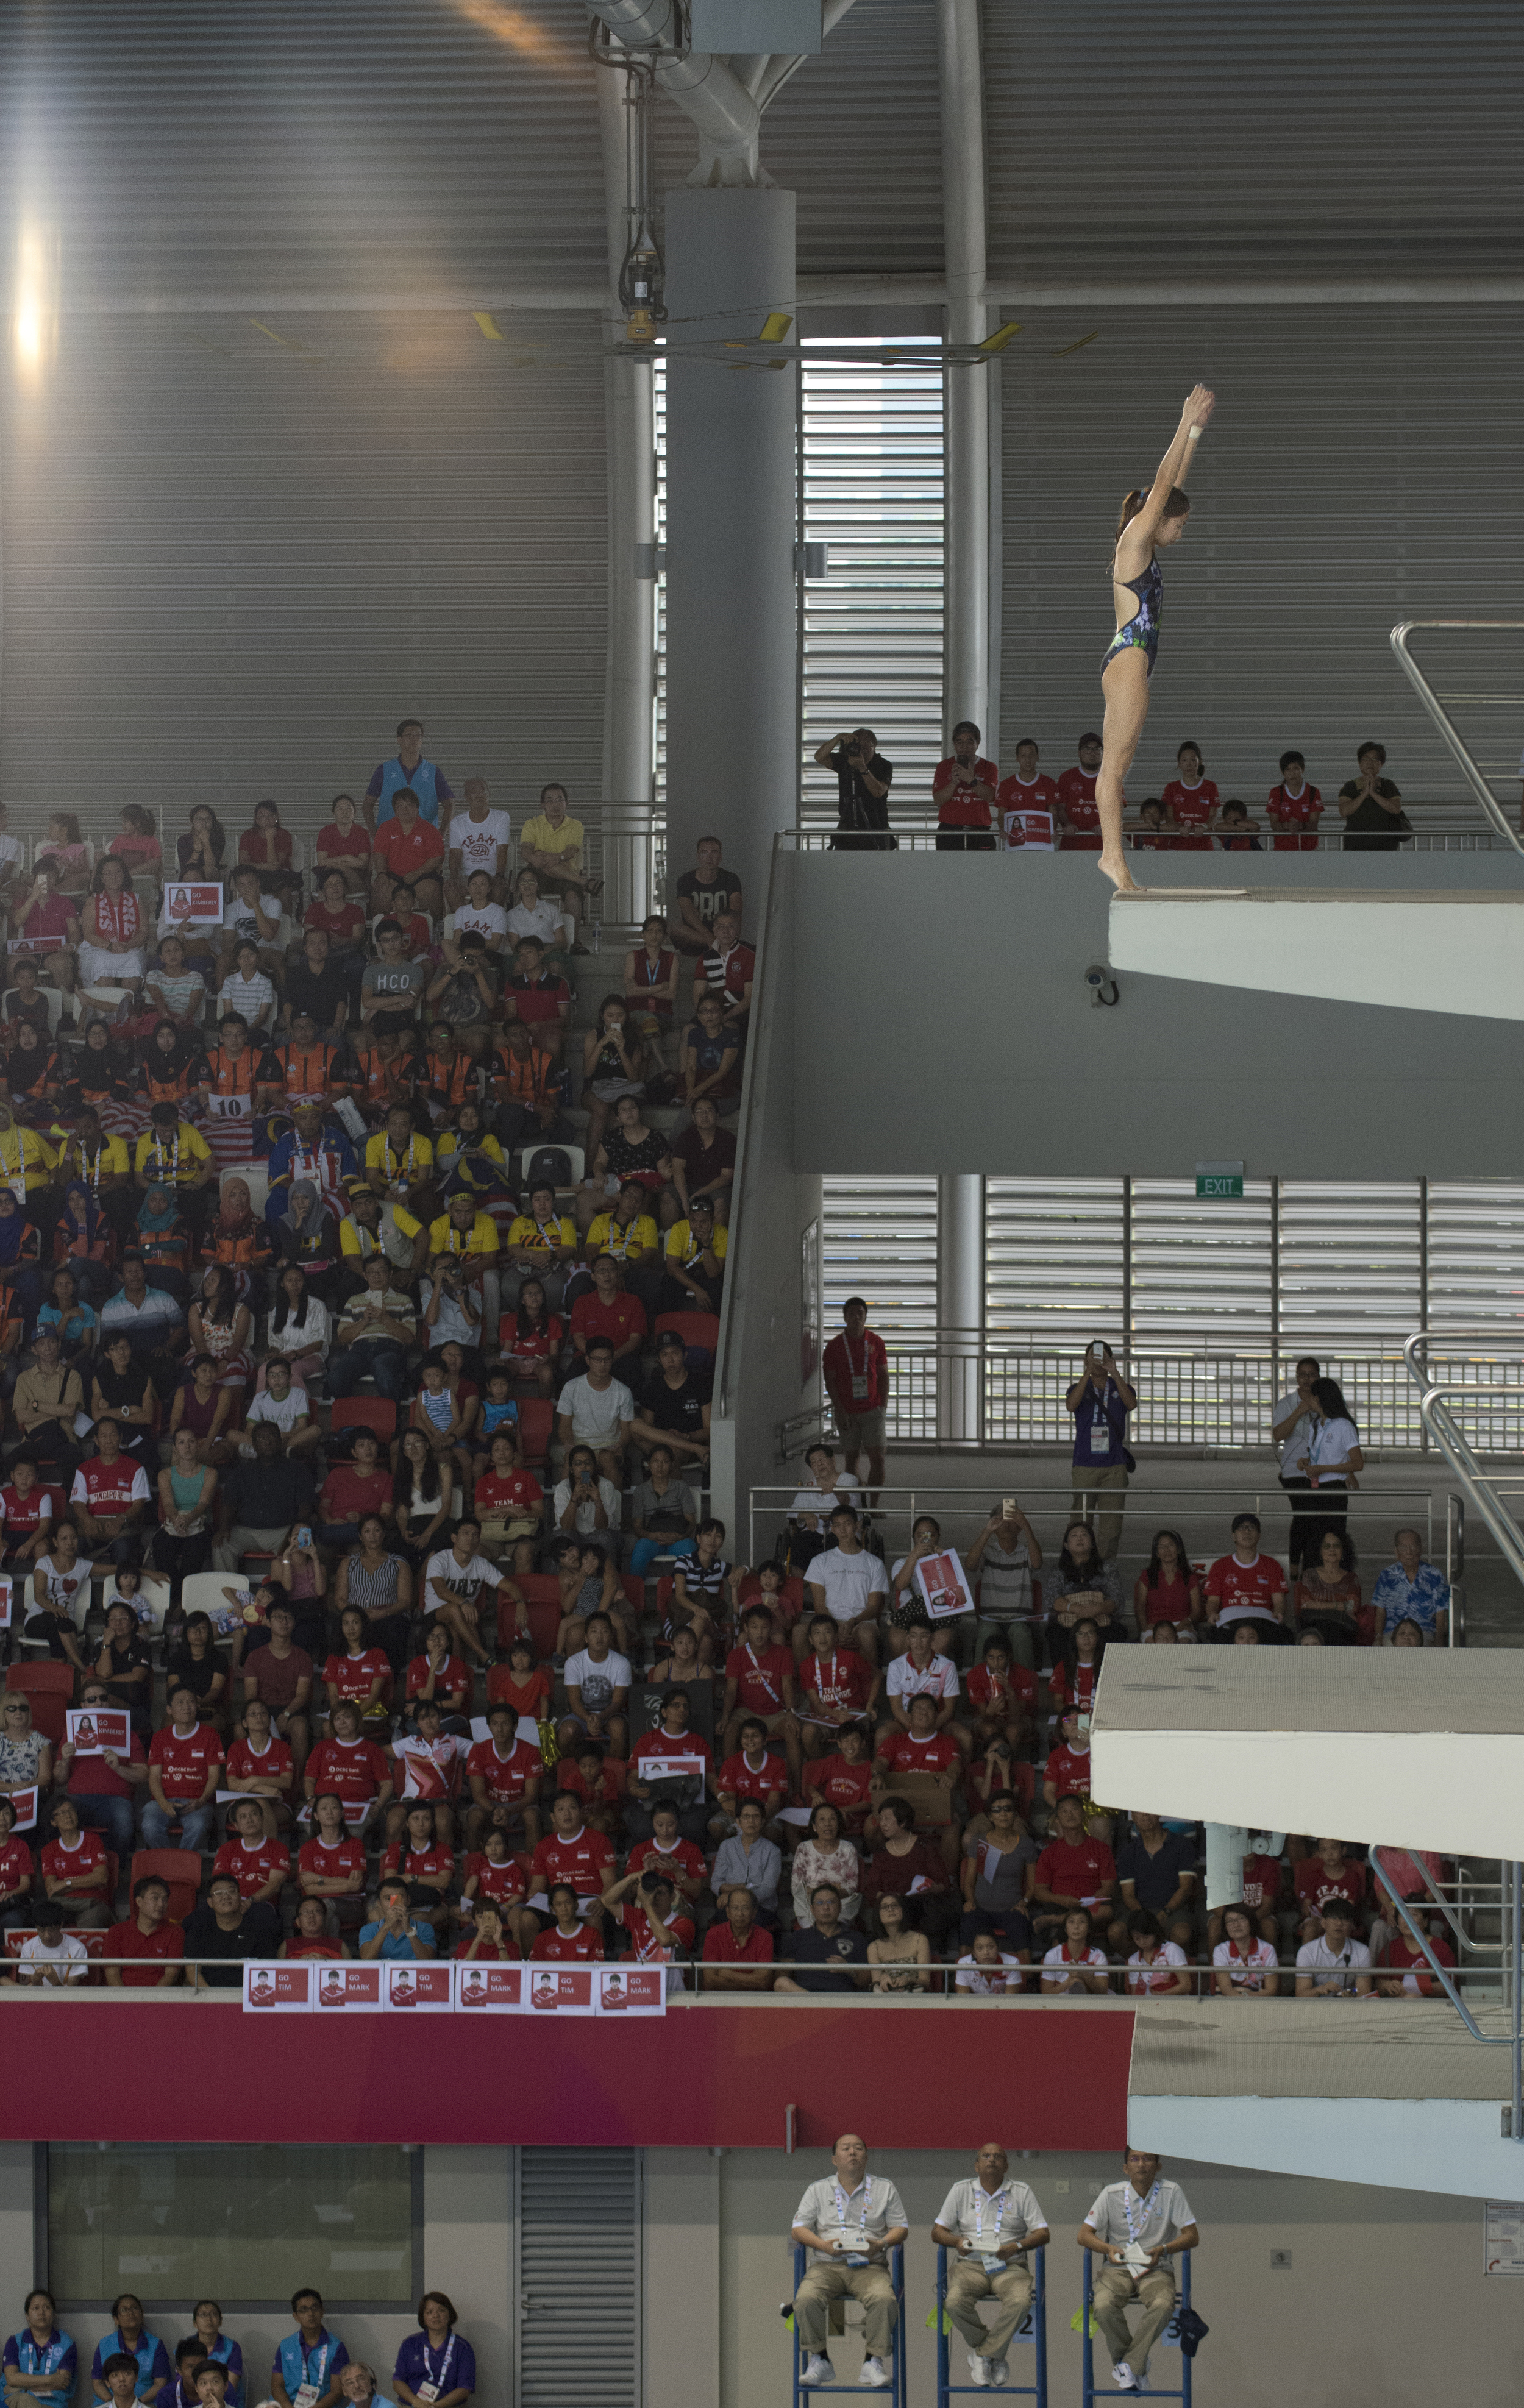 A diver prepares to take the plunge during the 10m diving finals of the SEA Games at the OCBC Aquatic Centre.